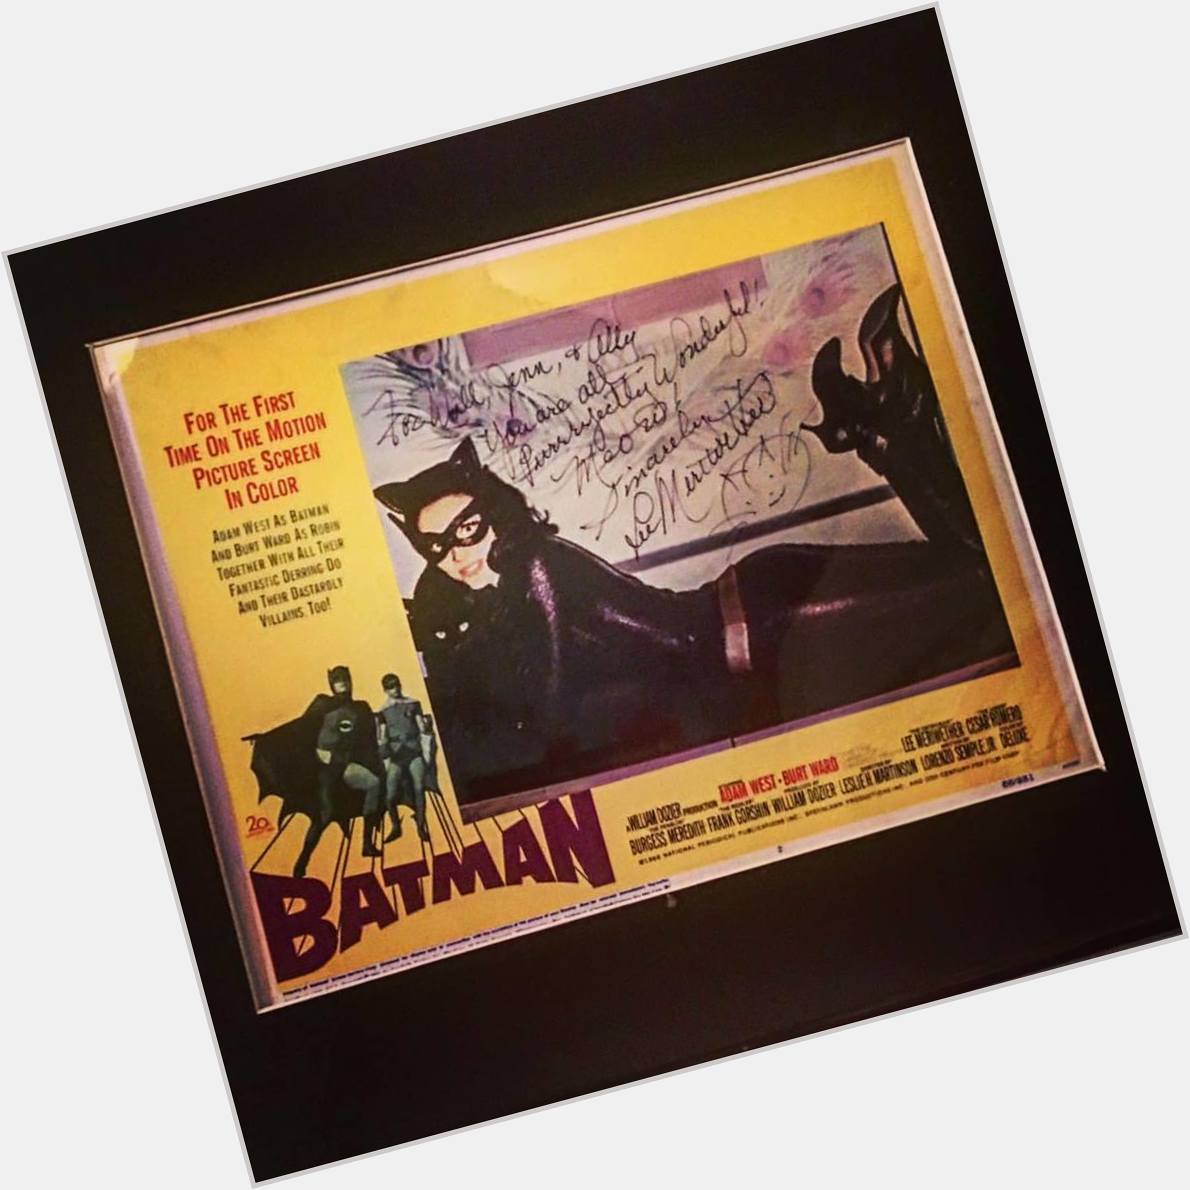 Happy birthday, Lee Meriwether. This poster is one of the coolest things I own, and it shall forever remain so. 